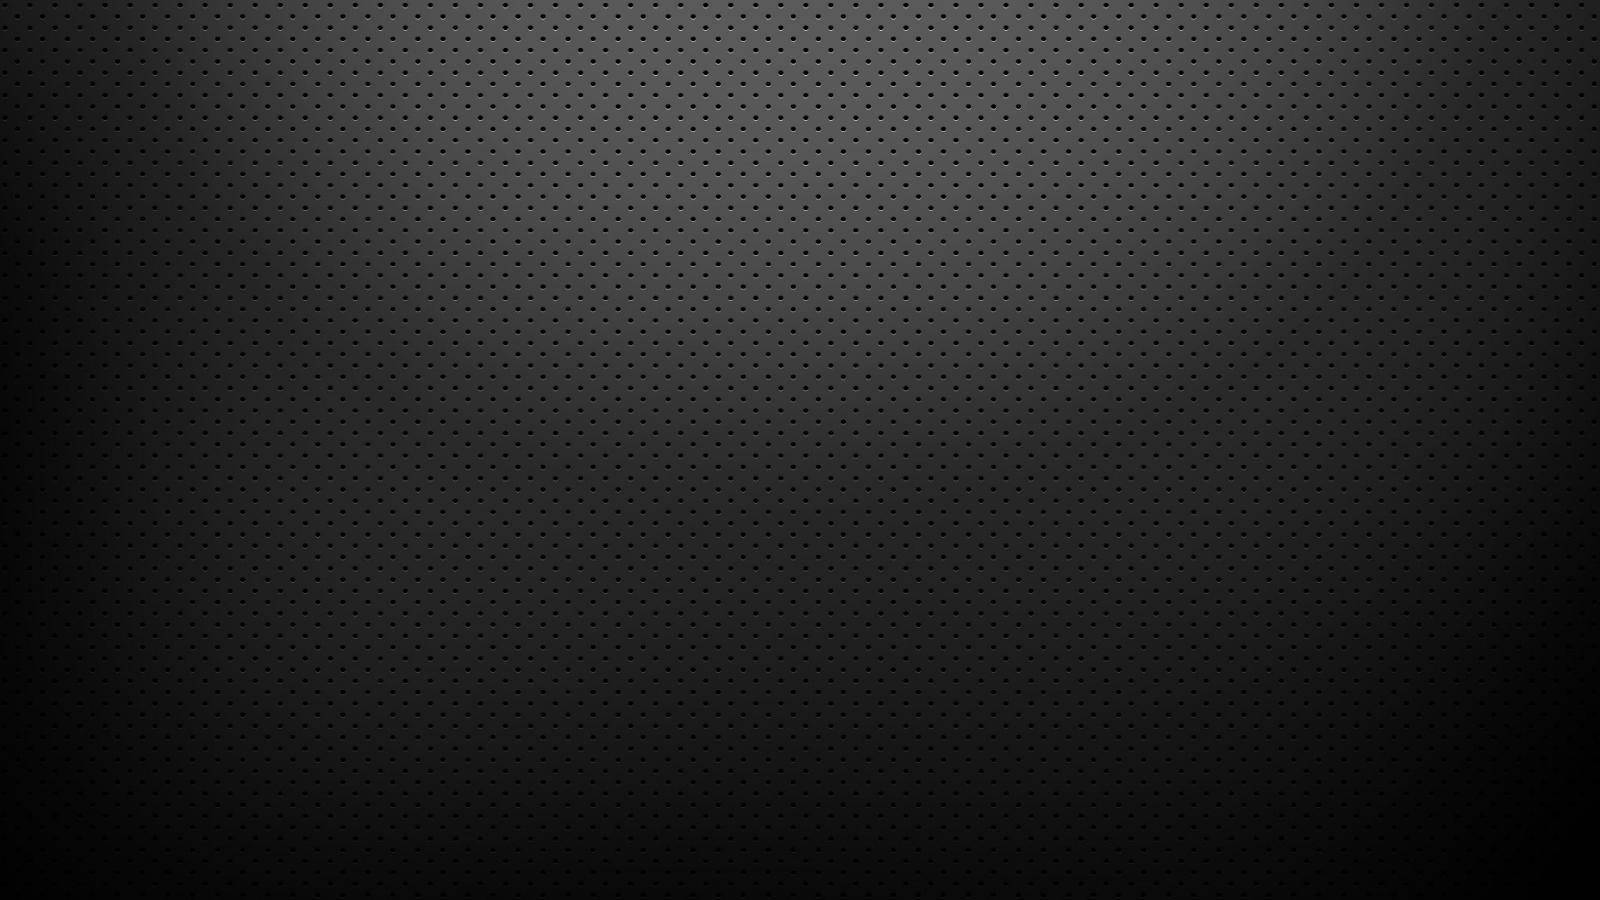 Plain Black With Small Holes Wallpaper